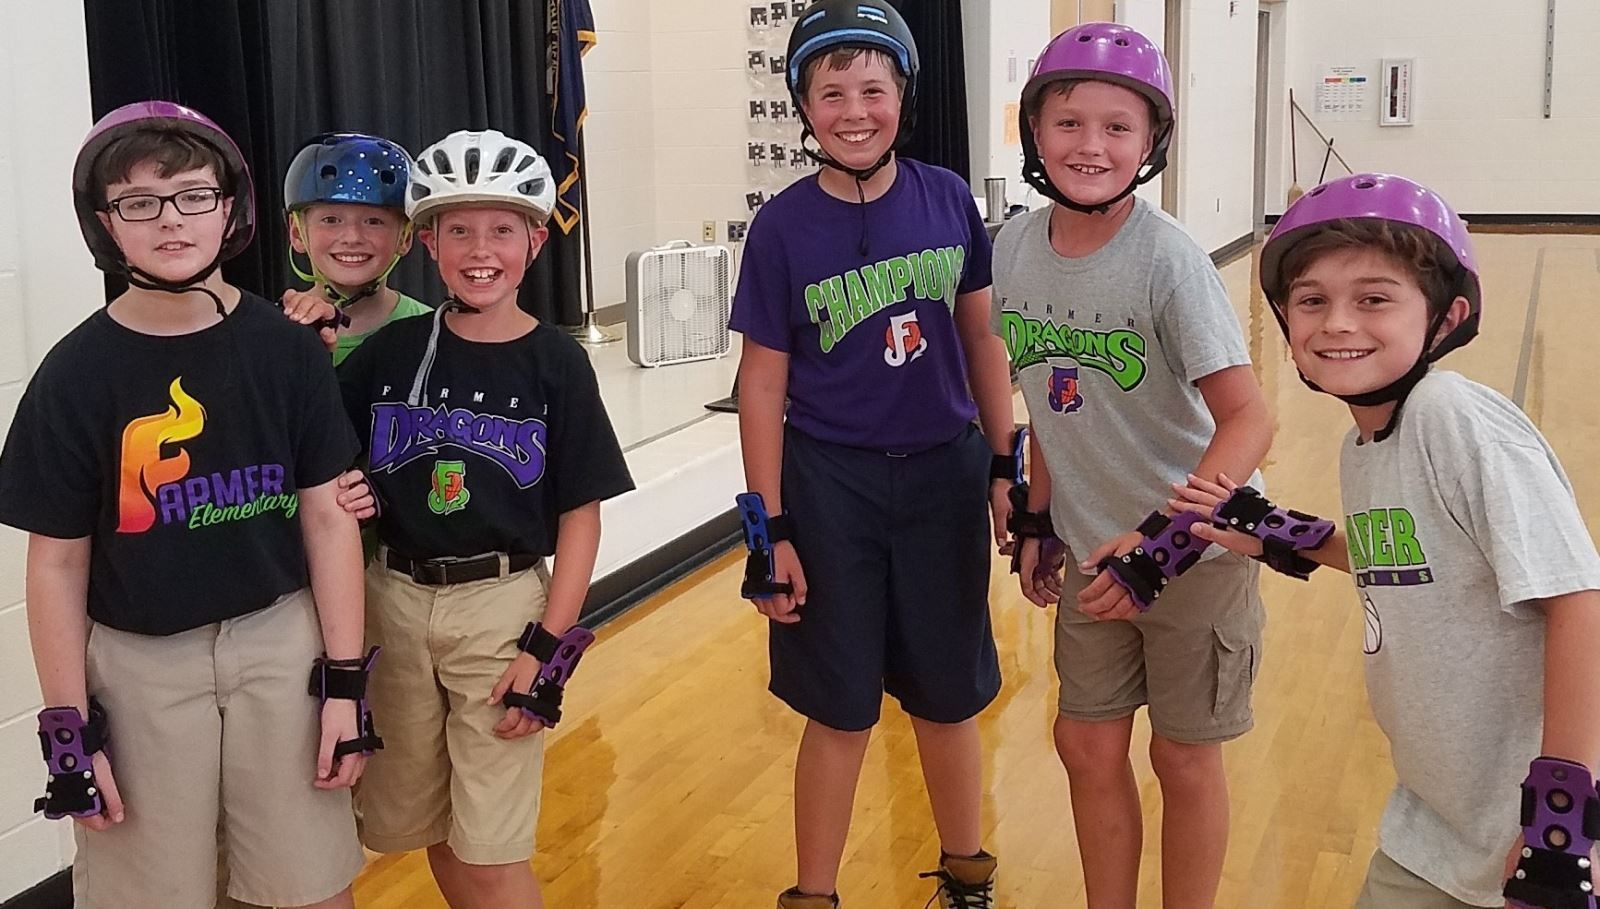 a group of young boys wearing roller skates and helmets pose for a picture